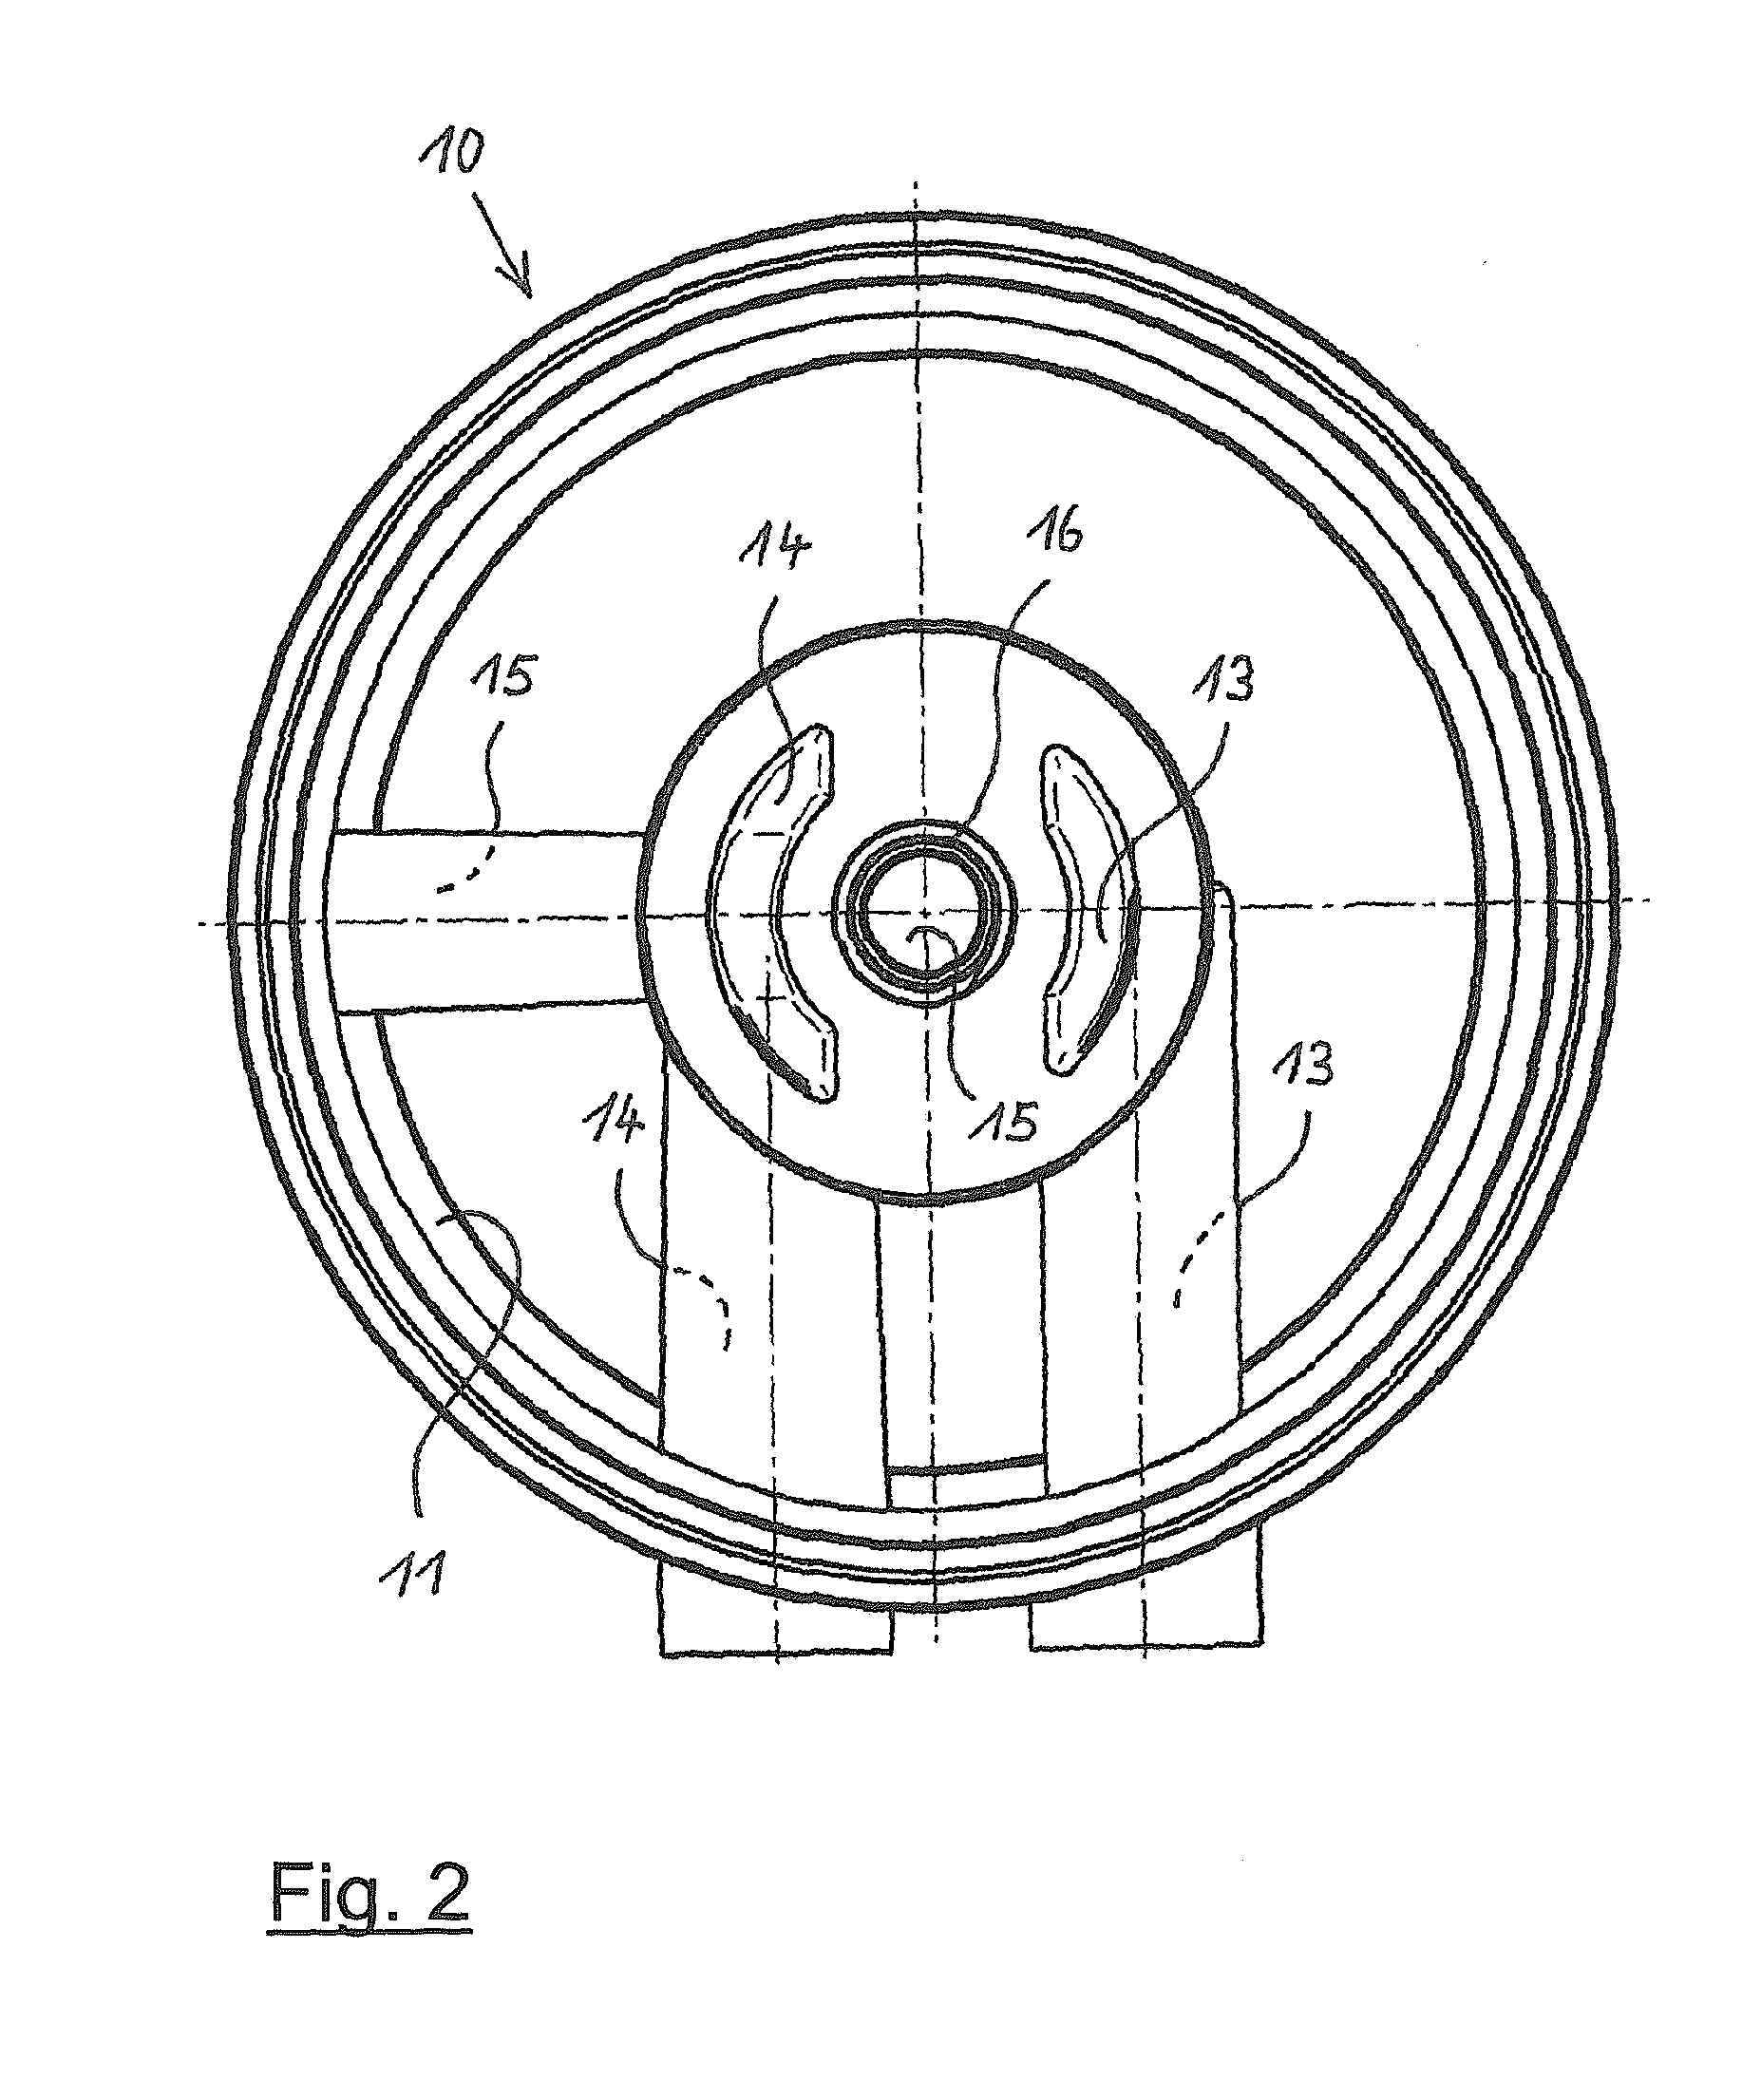 Fuel filter of an internal combustion engine